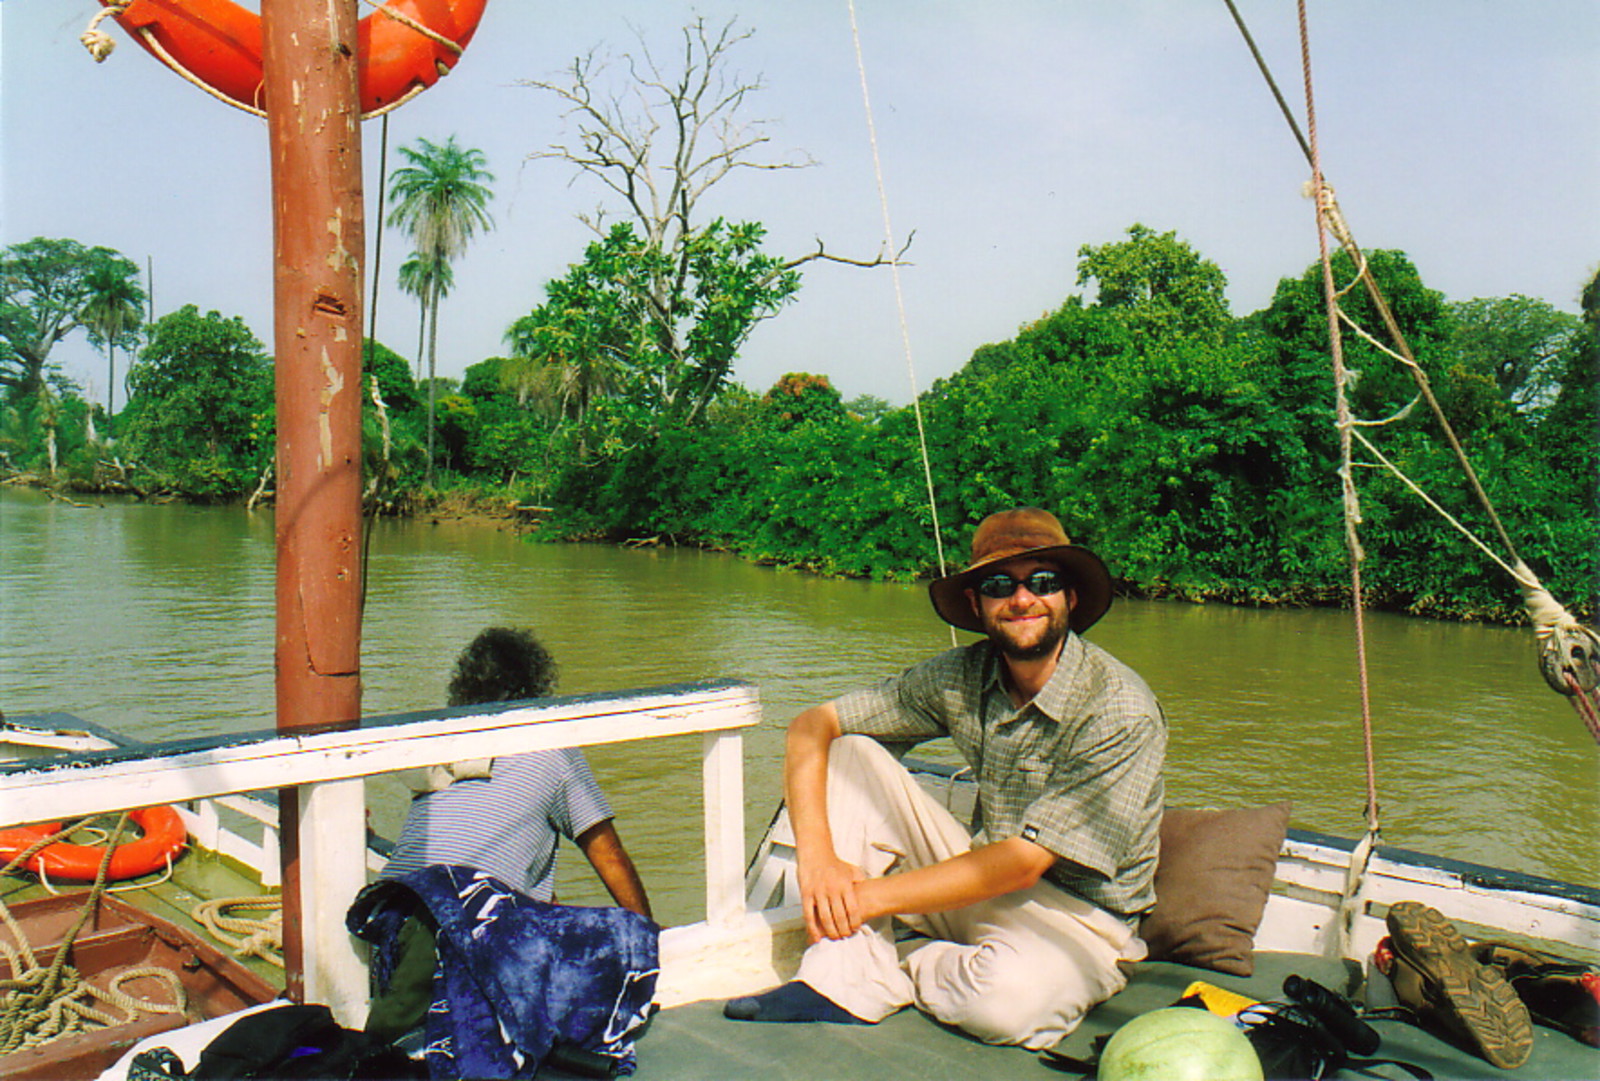 Mark relaxing on a boat on the River Gambia